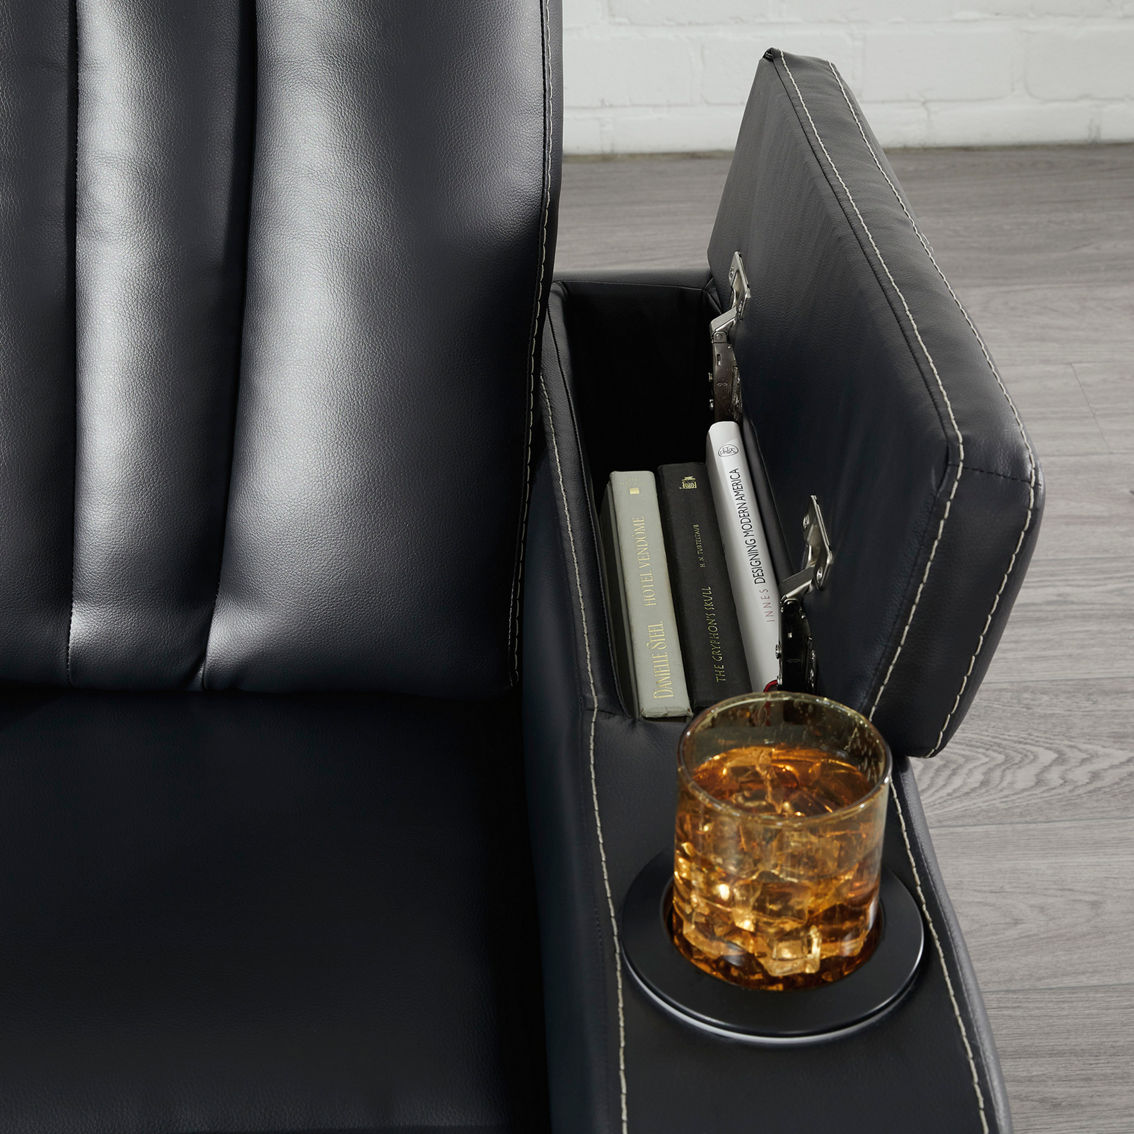 Signature Design by Ashley Center Point Recliner - Image 7 of 10